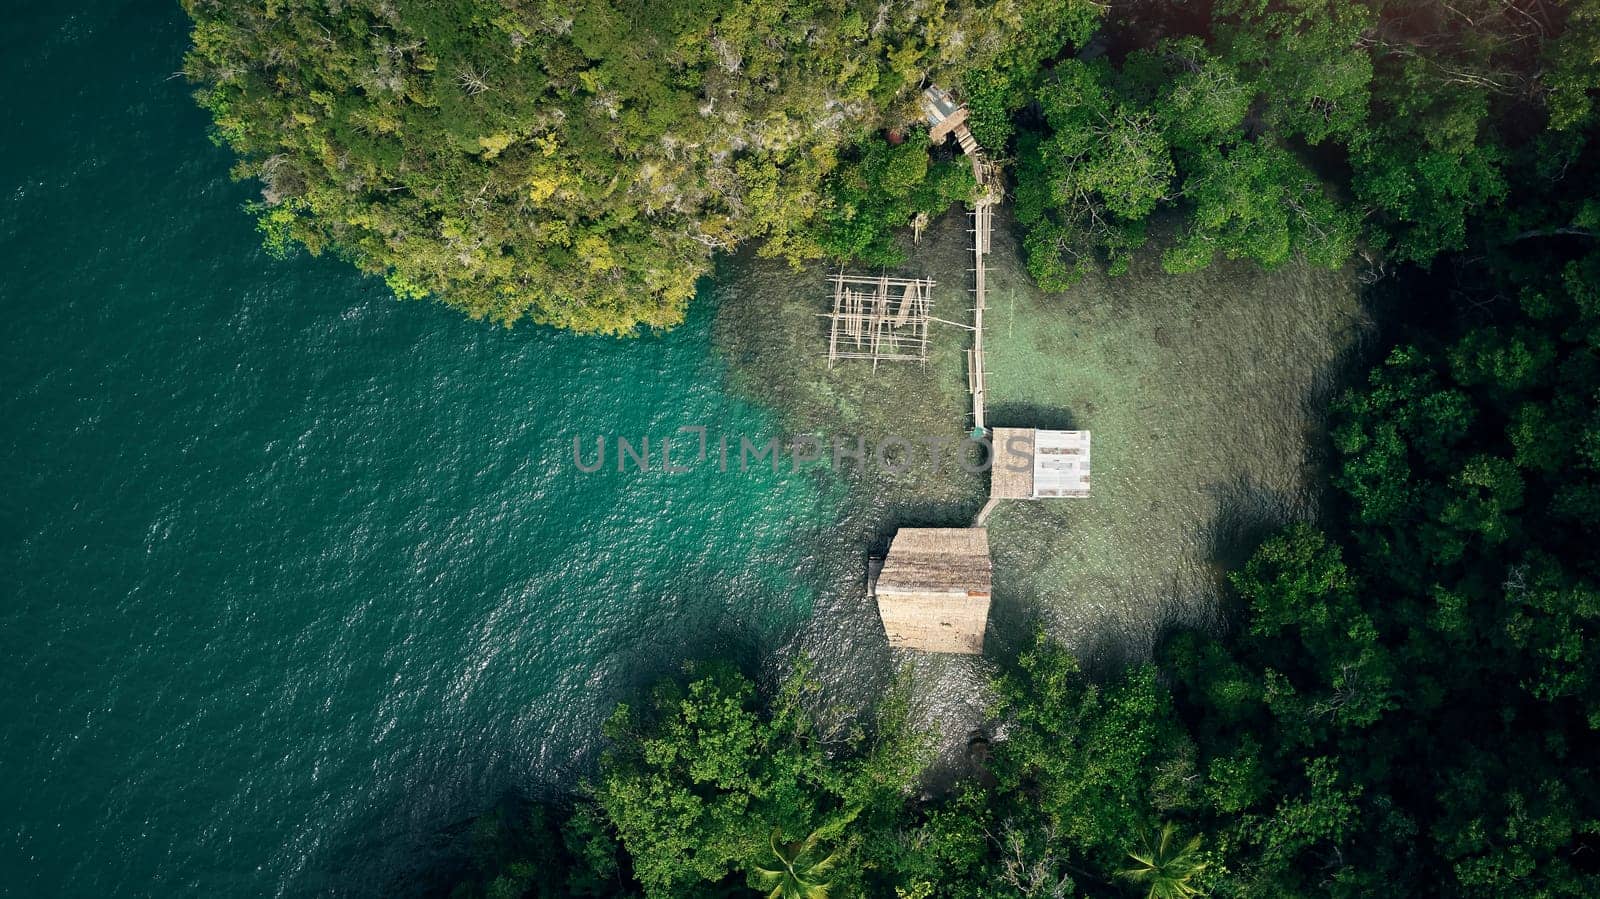 Drone, ocean and wood building in nature by beach, forest and woods with trees outdoor in Malaysia. Kelong, aerial view and house at sea for fishing, offshore or travel by water in summer environment by YuriArcurs